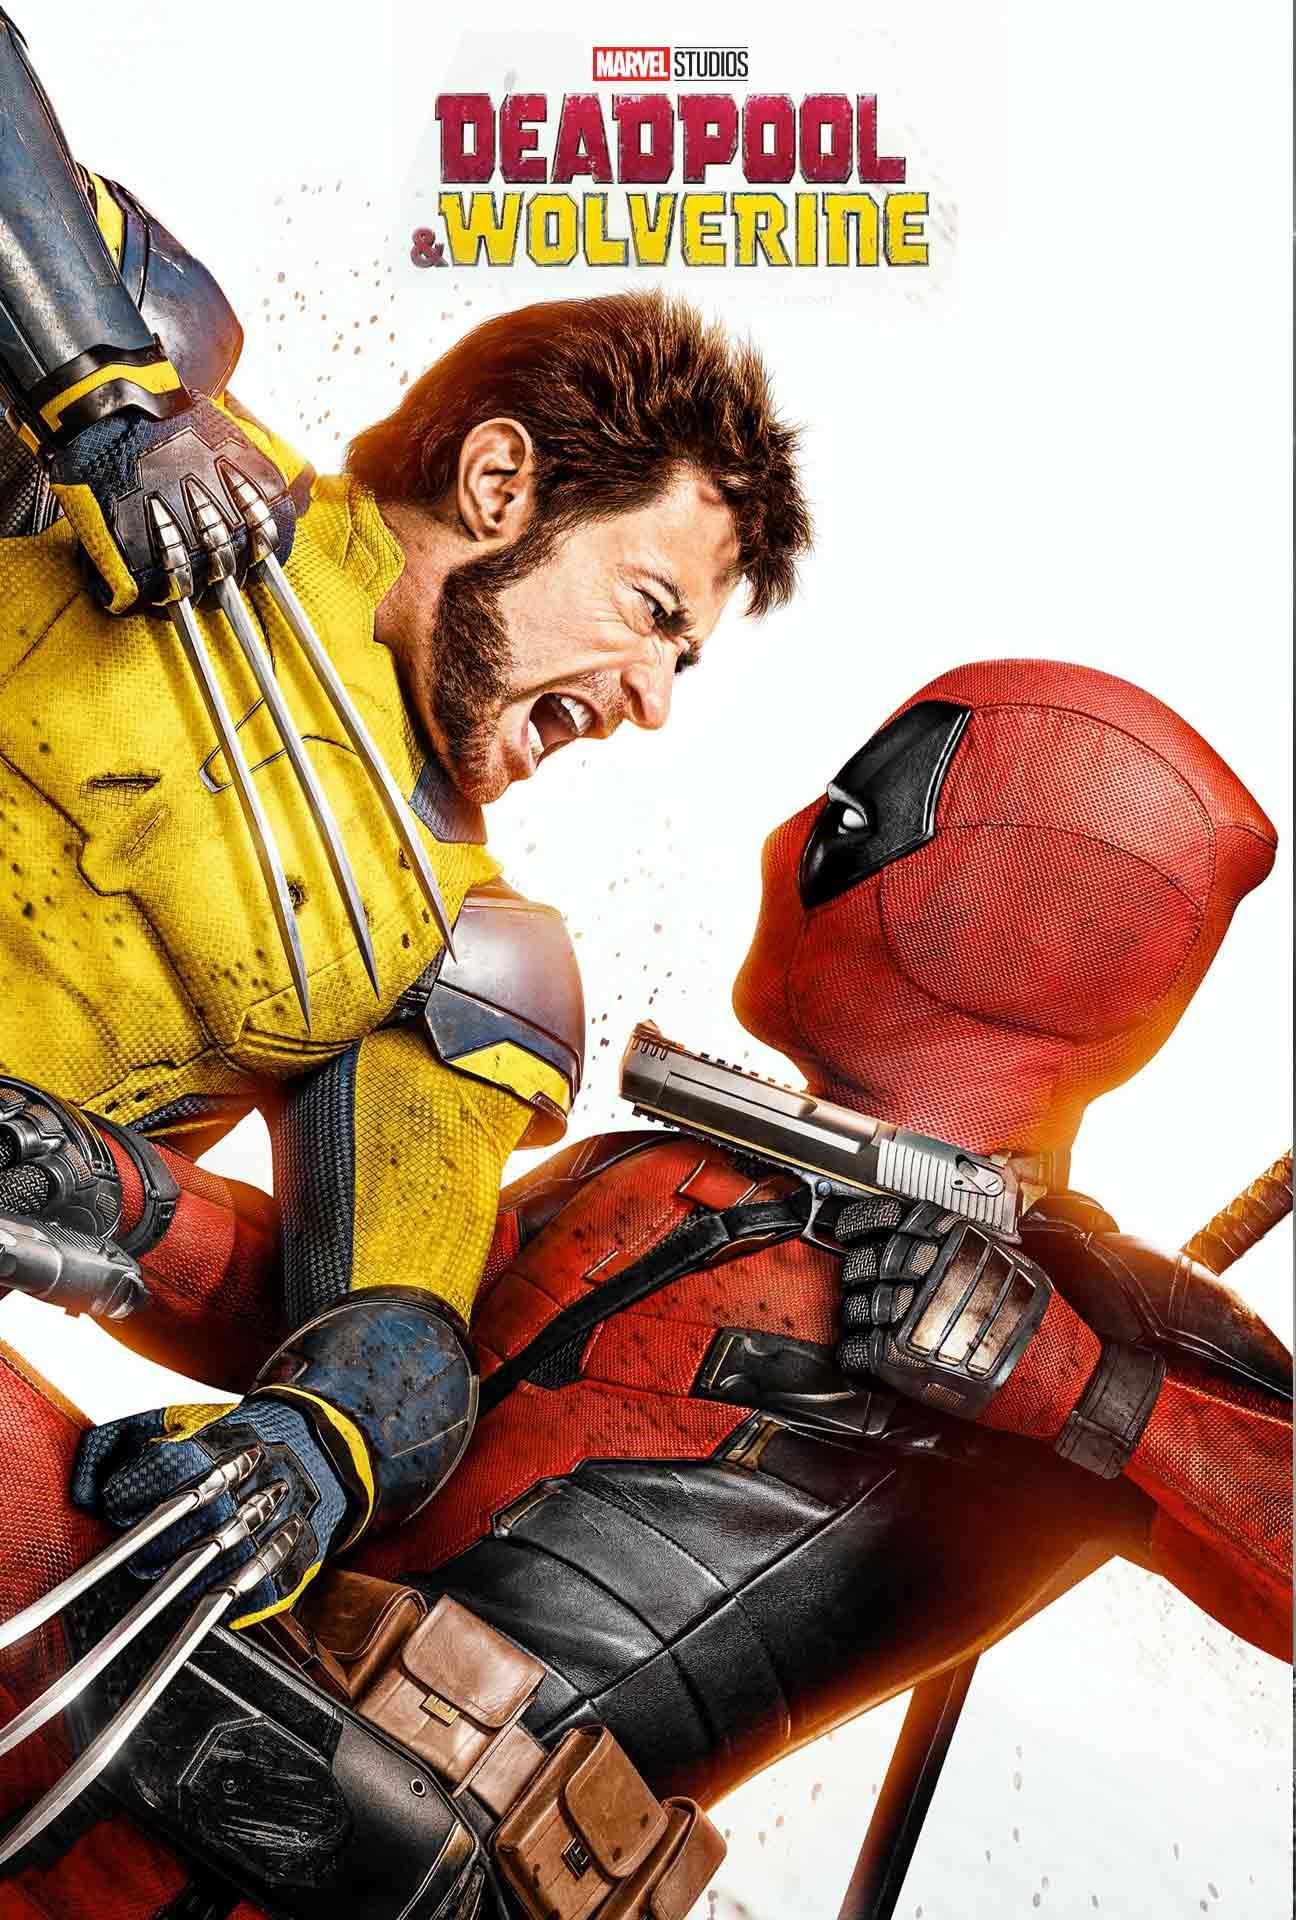 Movie Poster for Deadpool & Wolverine